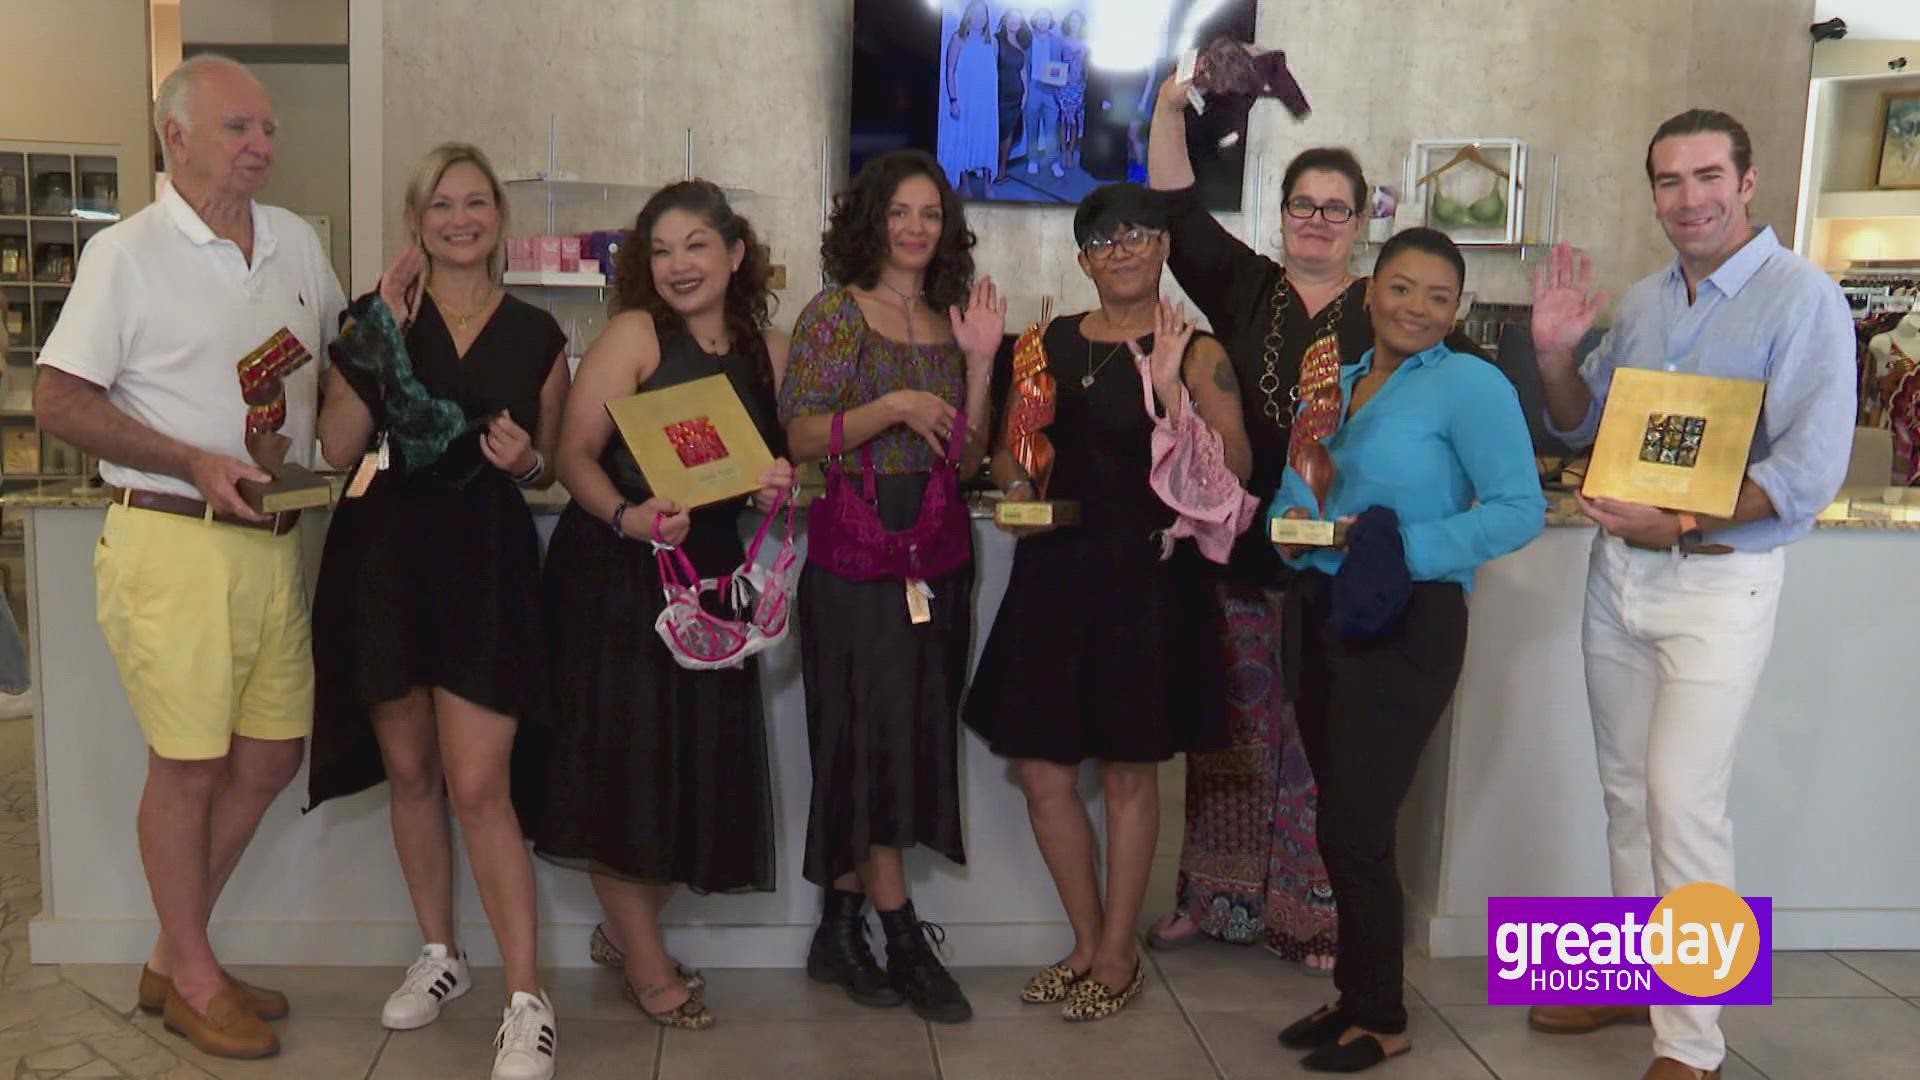 The boutique was named The Best of Intima "Store of the Year" for the third year in a row.